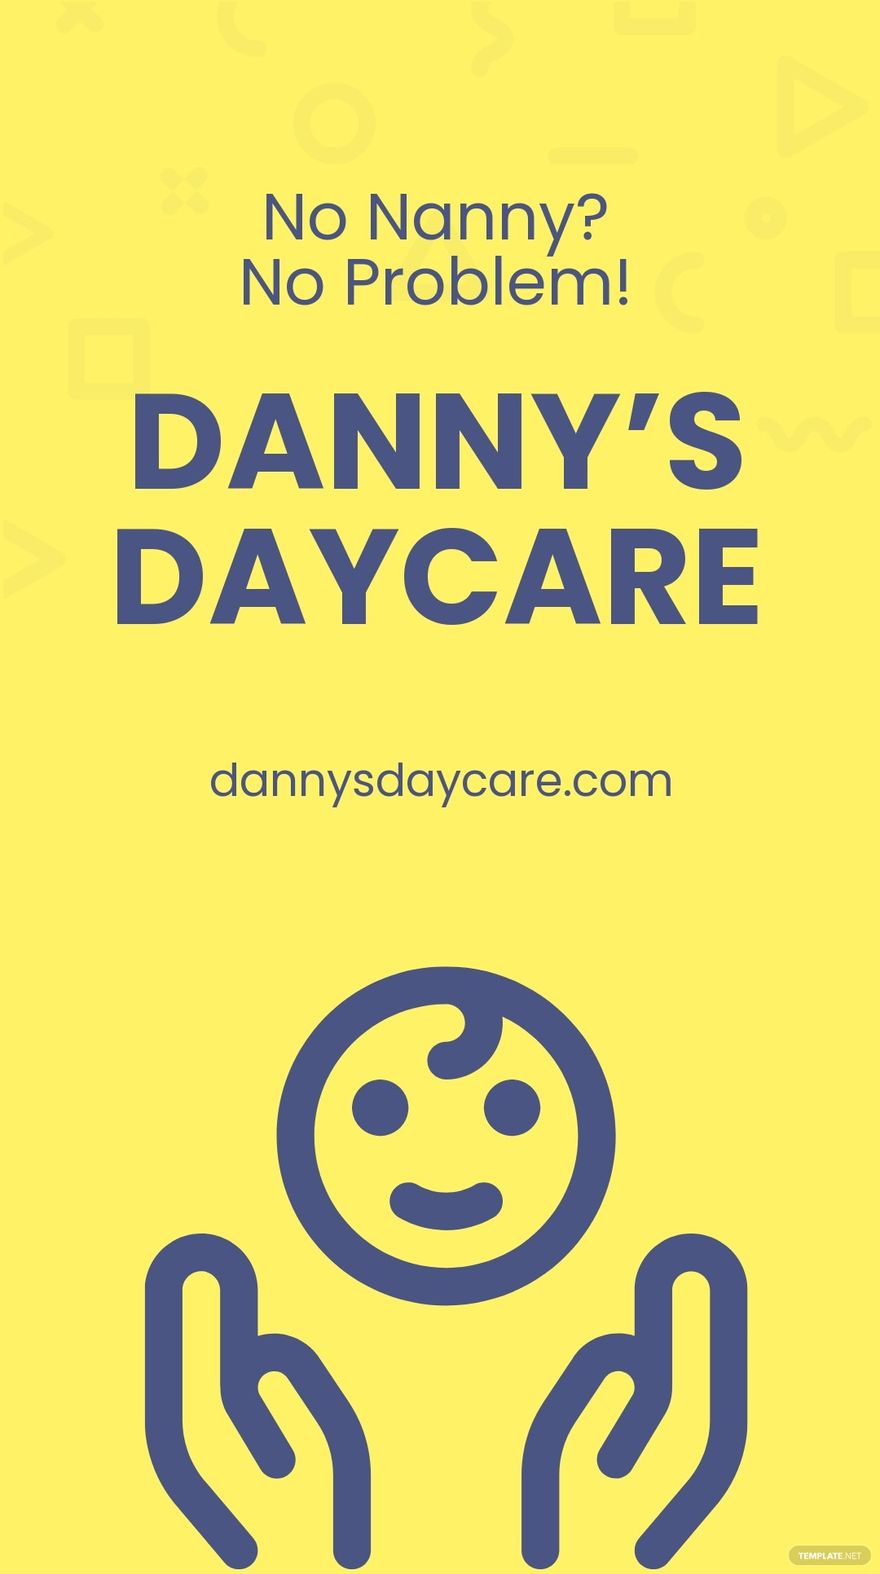 Free Daycare Services Whatsapp Post Template